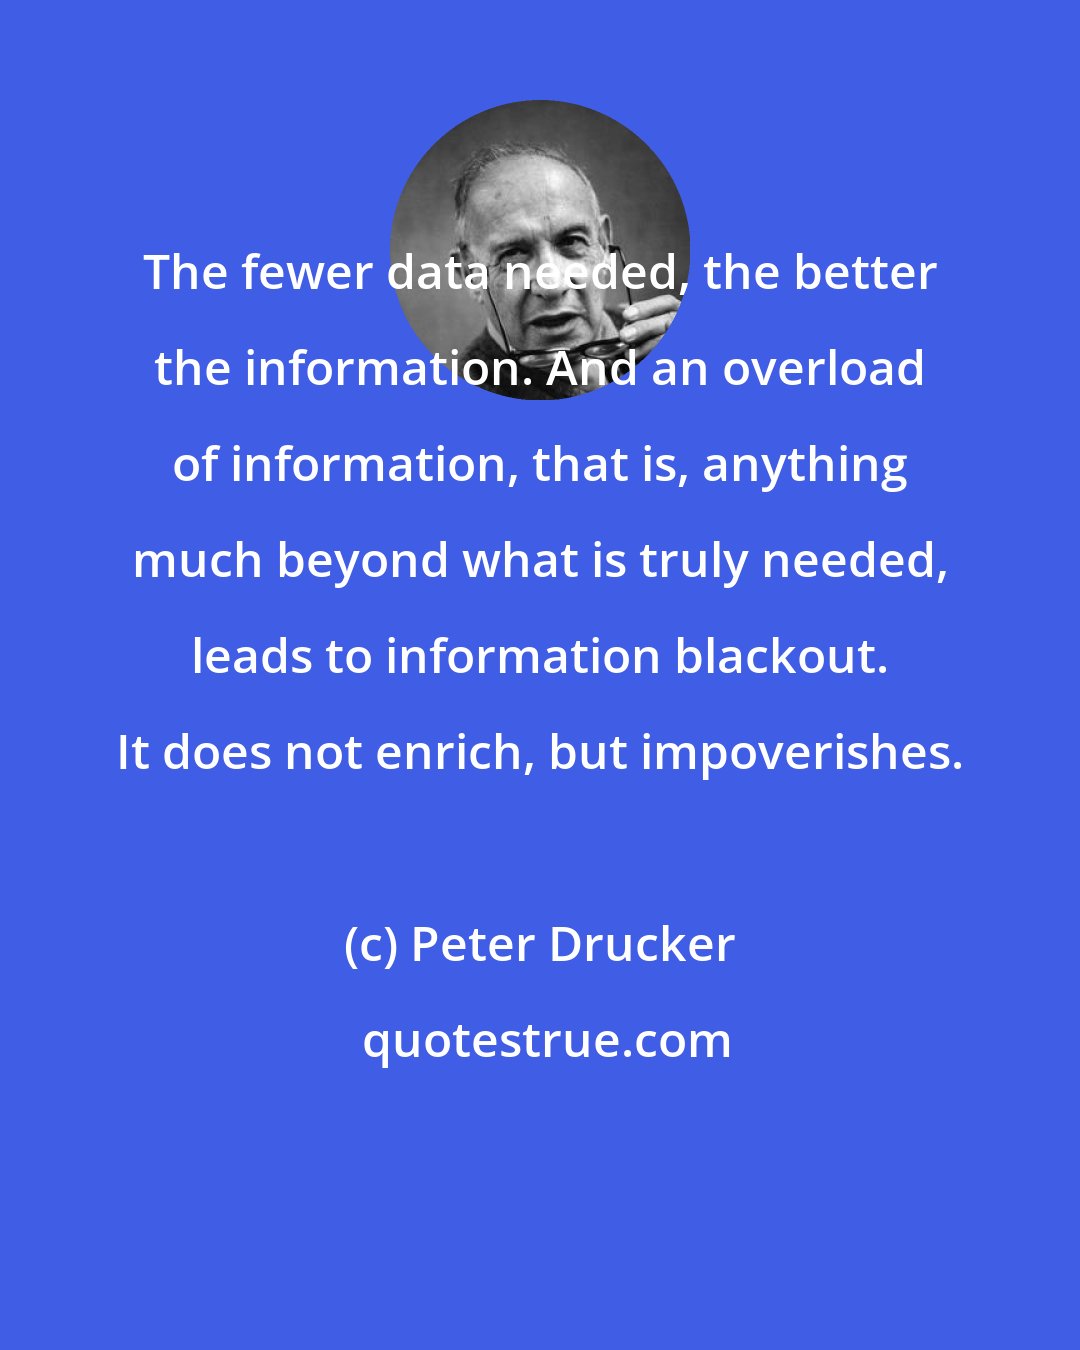 Peter Drucker: The fewer data needed, the better the information. And an overload of information, that is, anything much beyond what is truly needed, leads to information blackout. It does not enrich, but impoverishes.